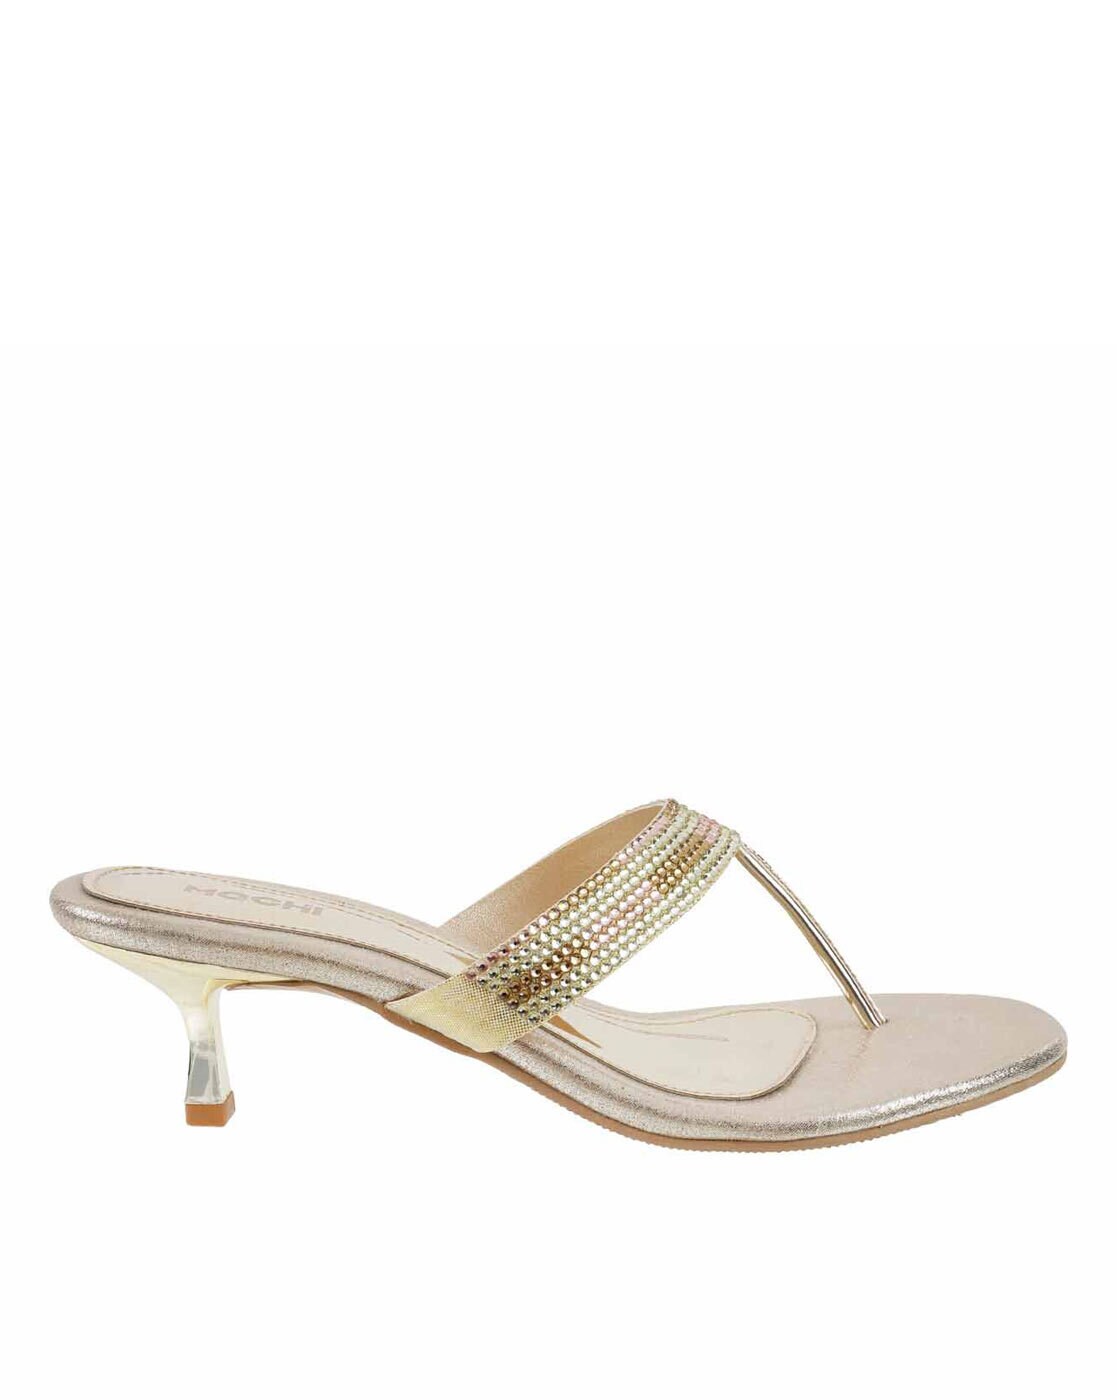 Buy Gold Heeled Sandals for Women by Mochi Online